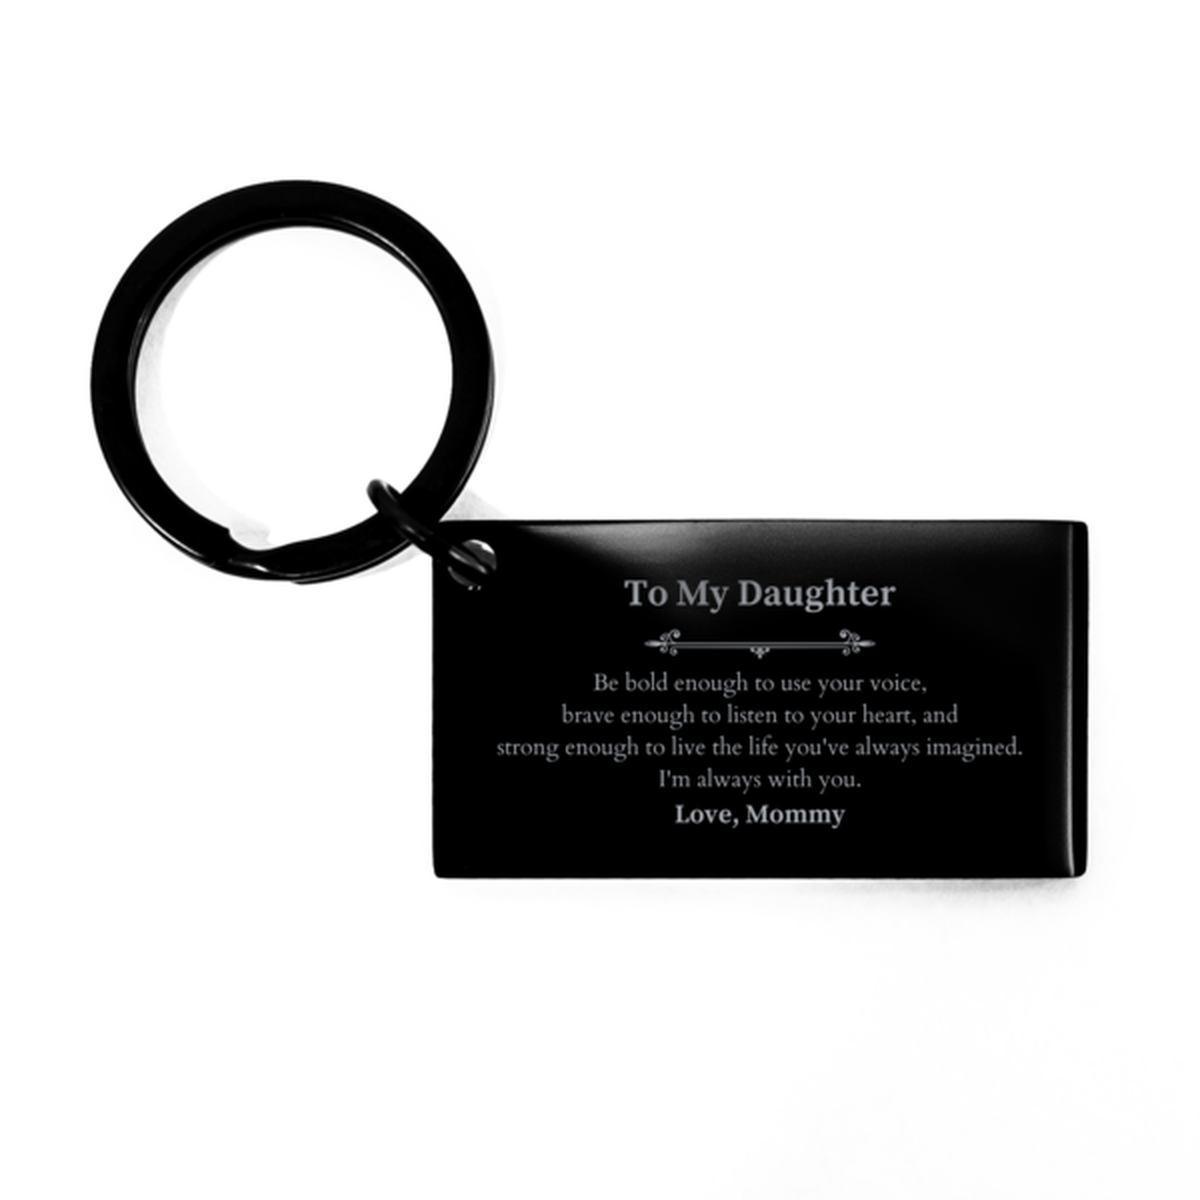 Keepsake Daughter Keychain Gift Idea Graduation Christmas Birthday Daughter from Mommy, Daughter Be bold enough to use your voice, brave enough to listen to your heart. Love, Mommy